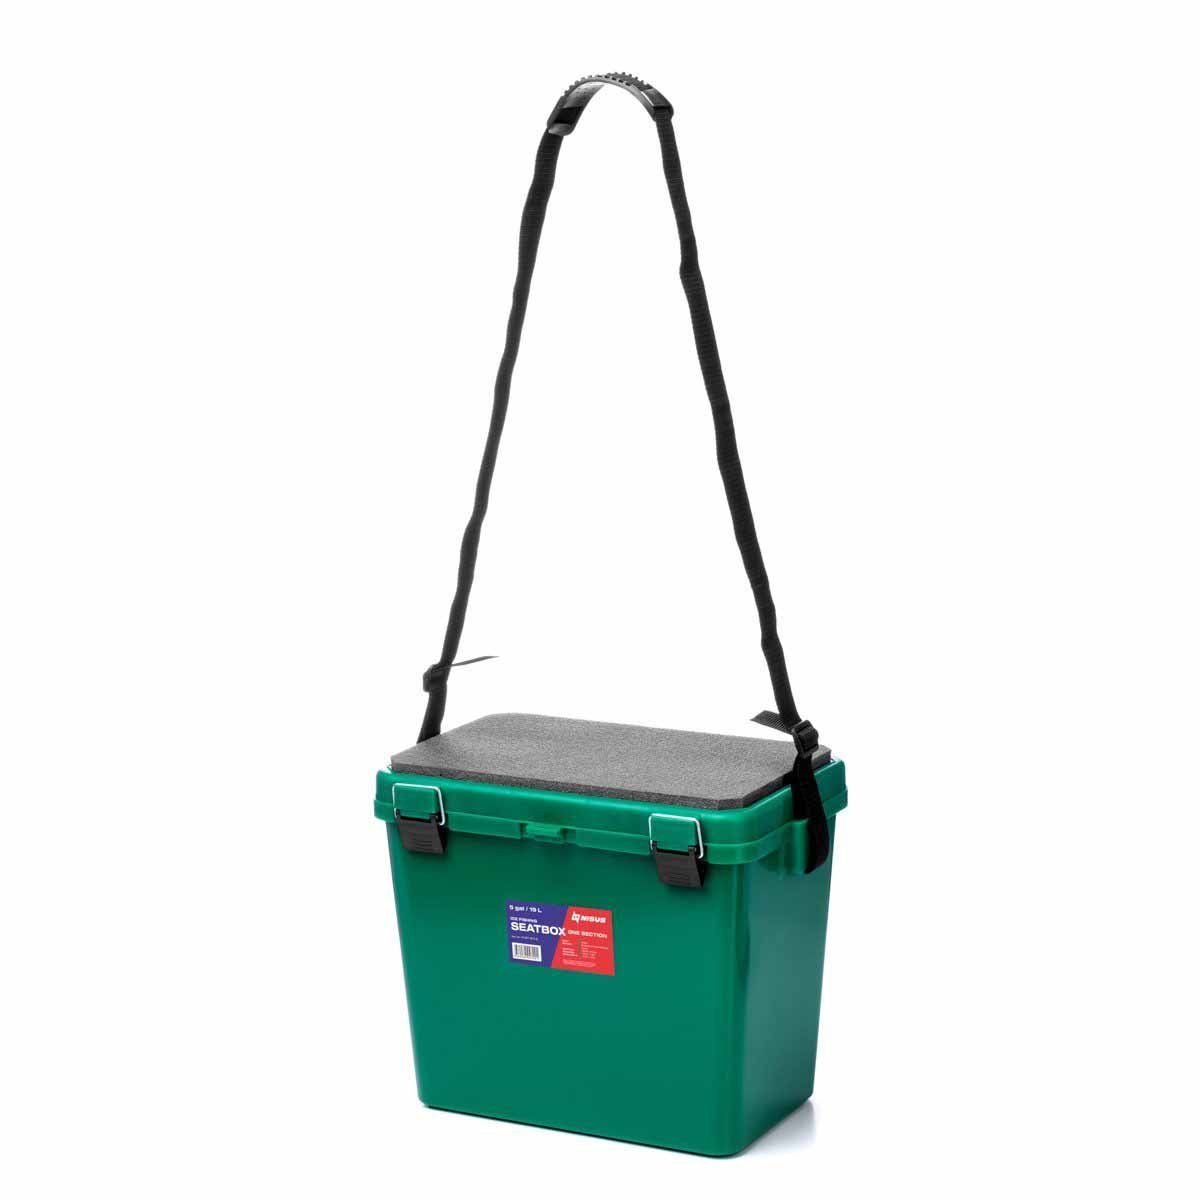 Ice Fishing Bucket Type Box with Seat and Adjustable Shoulder Strap, 5 gal, green